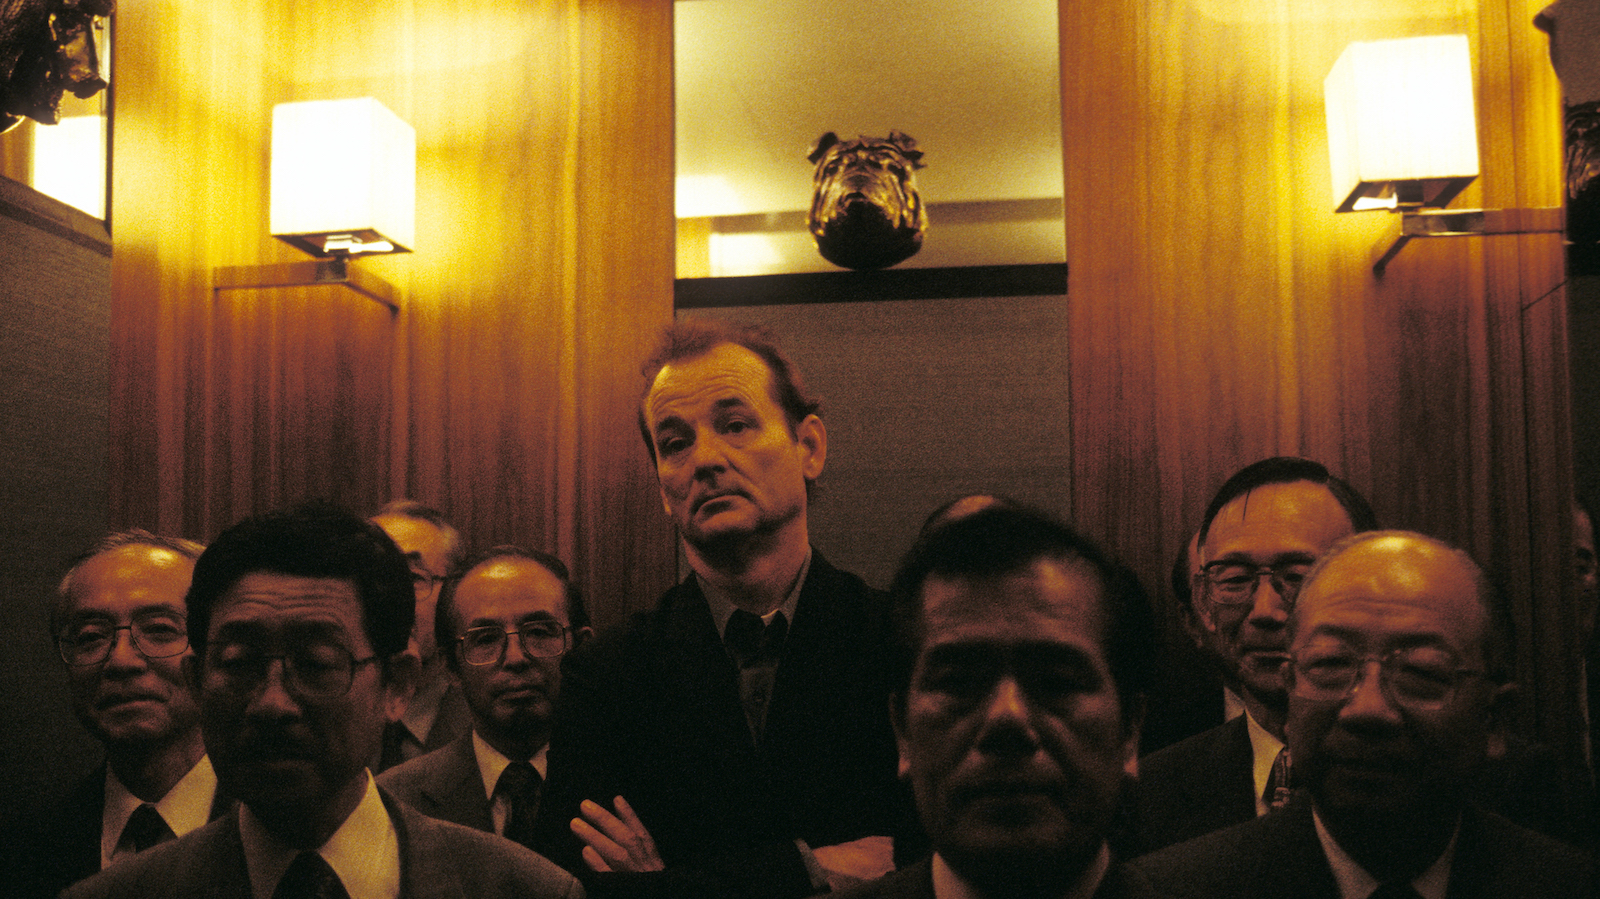 A man stands in an elevator surrounded by men who are shorter than him, his arms folded indifferently